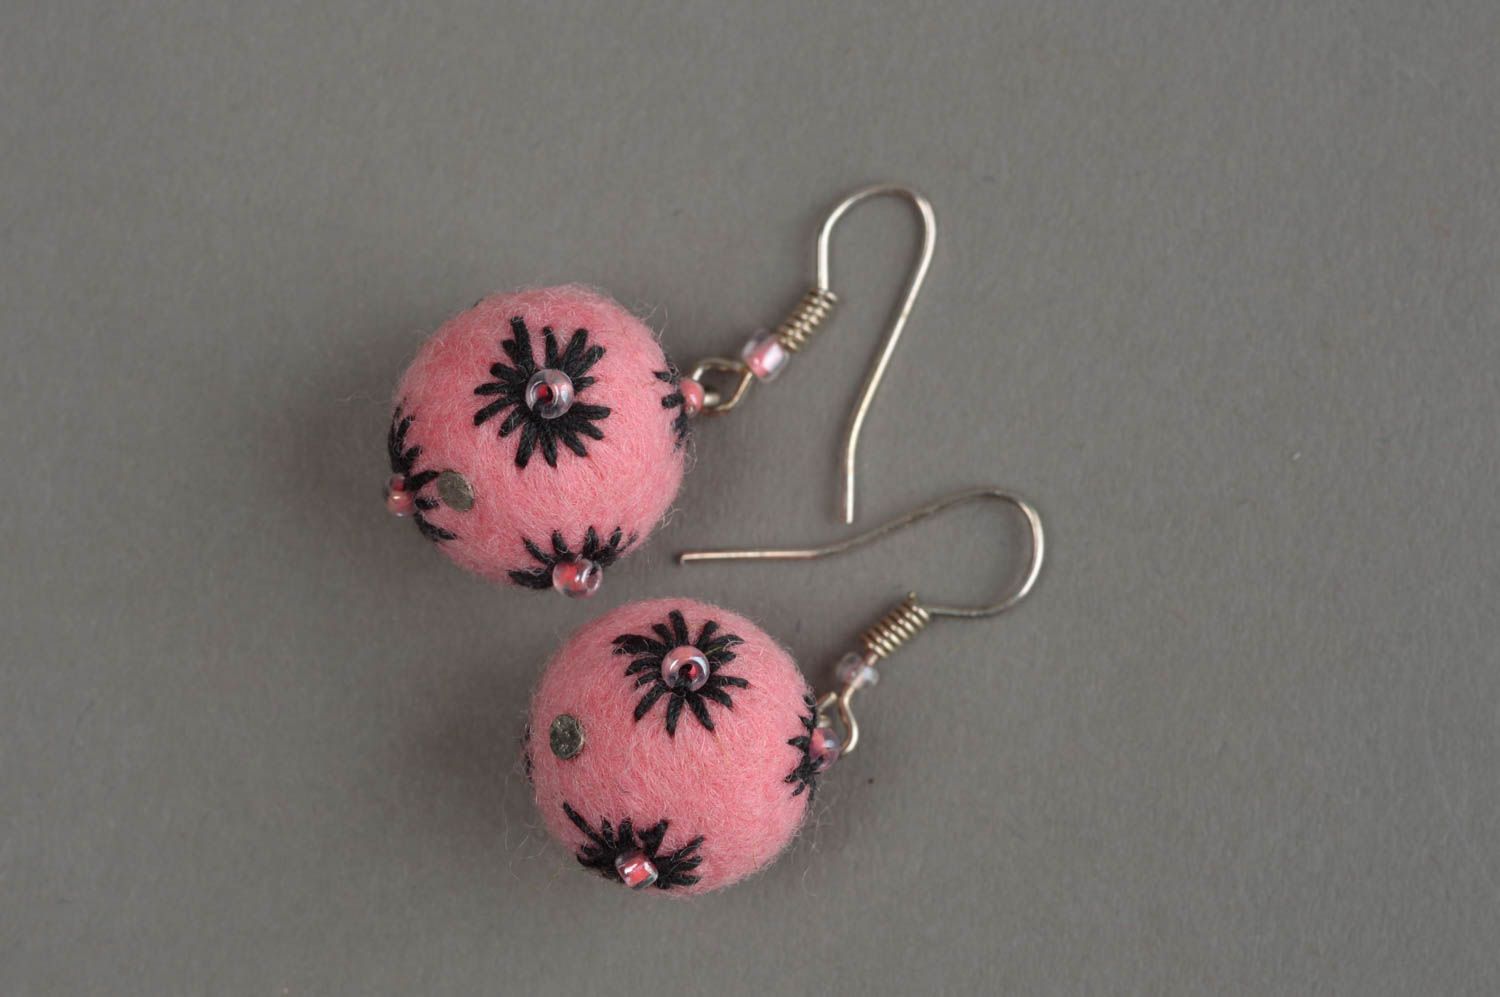 Ball earrings handmade earrings felted balls handcrafted jewelry gifts for her photo 3